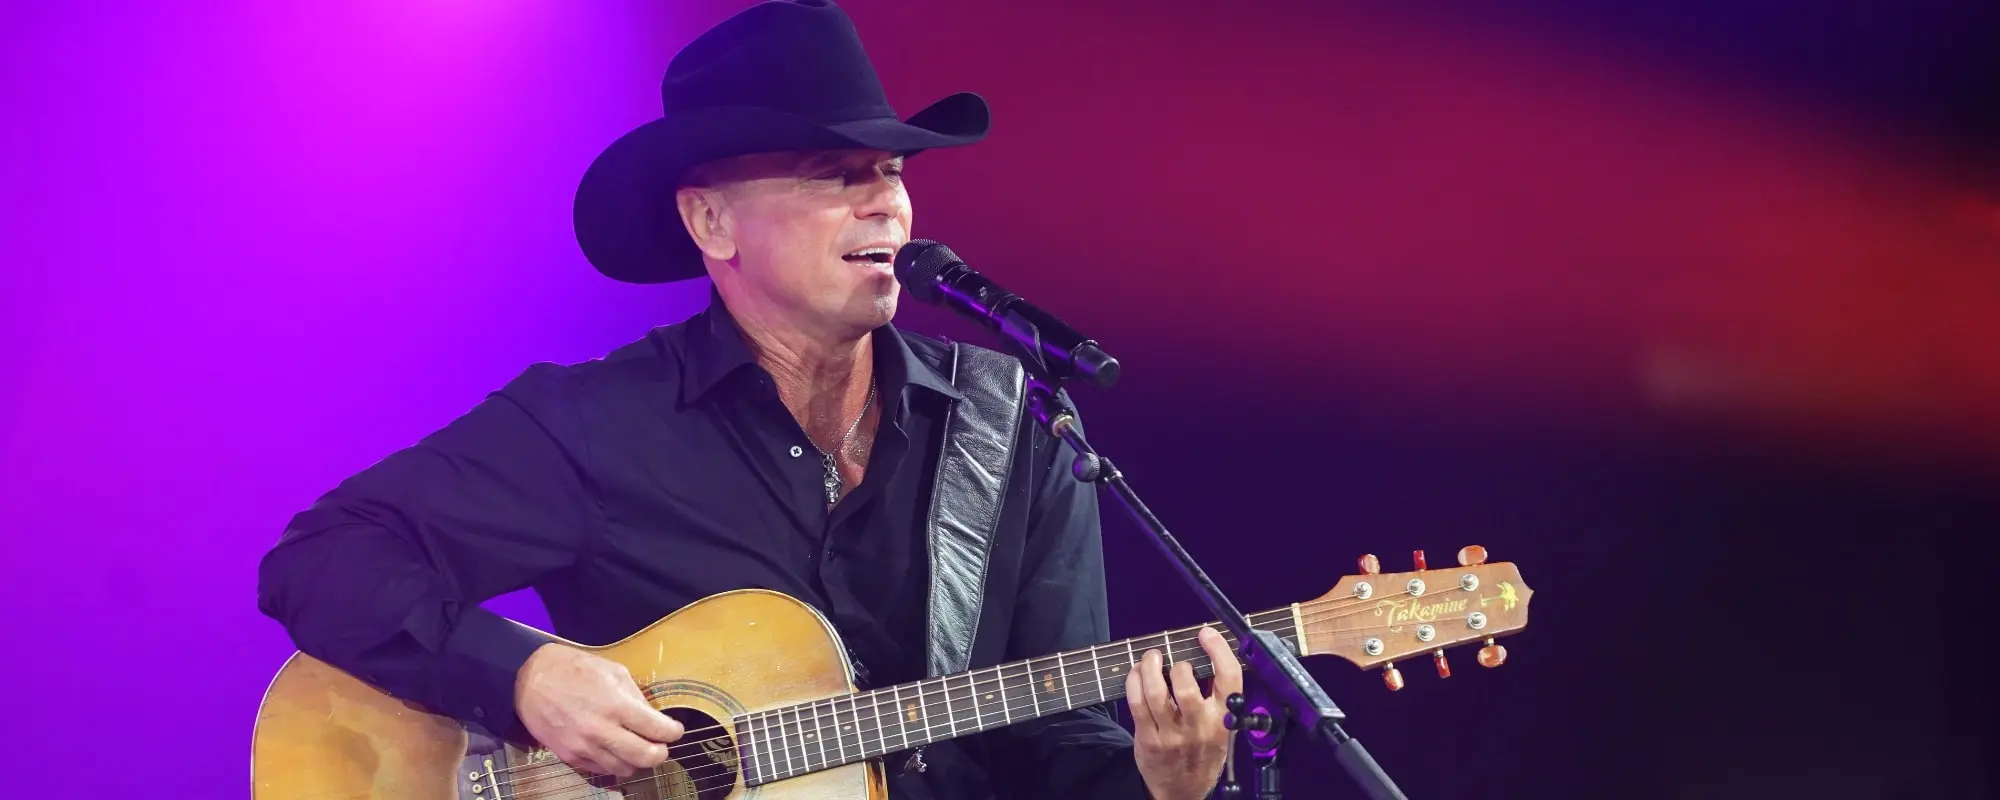 Kenny Chesney Burns Up the Charts with His Latest Album ‘Born’